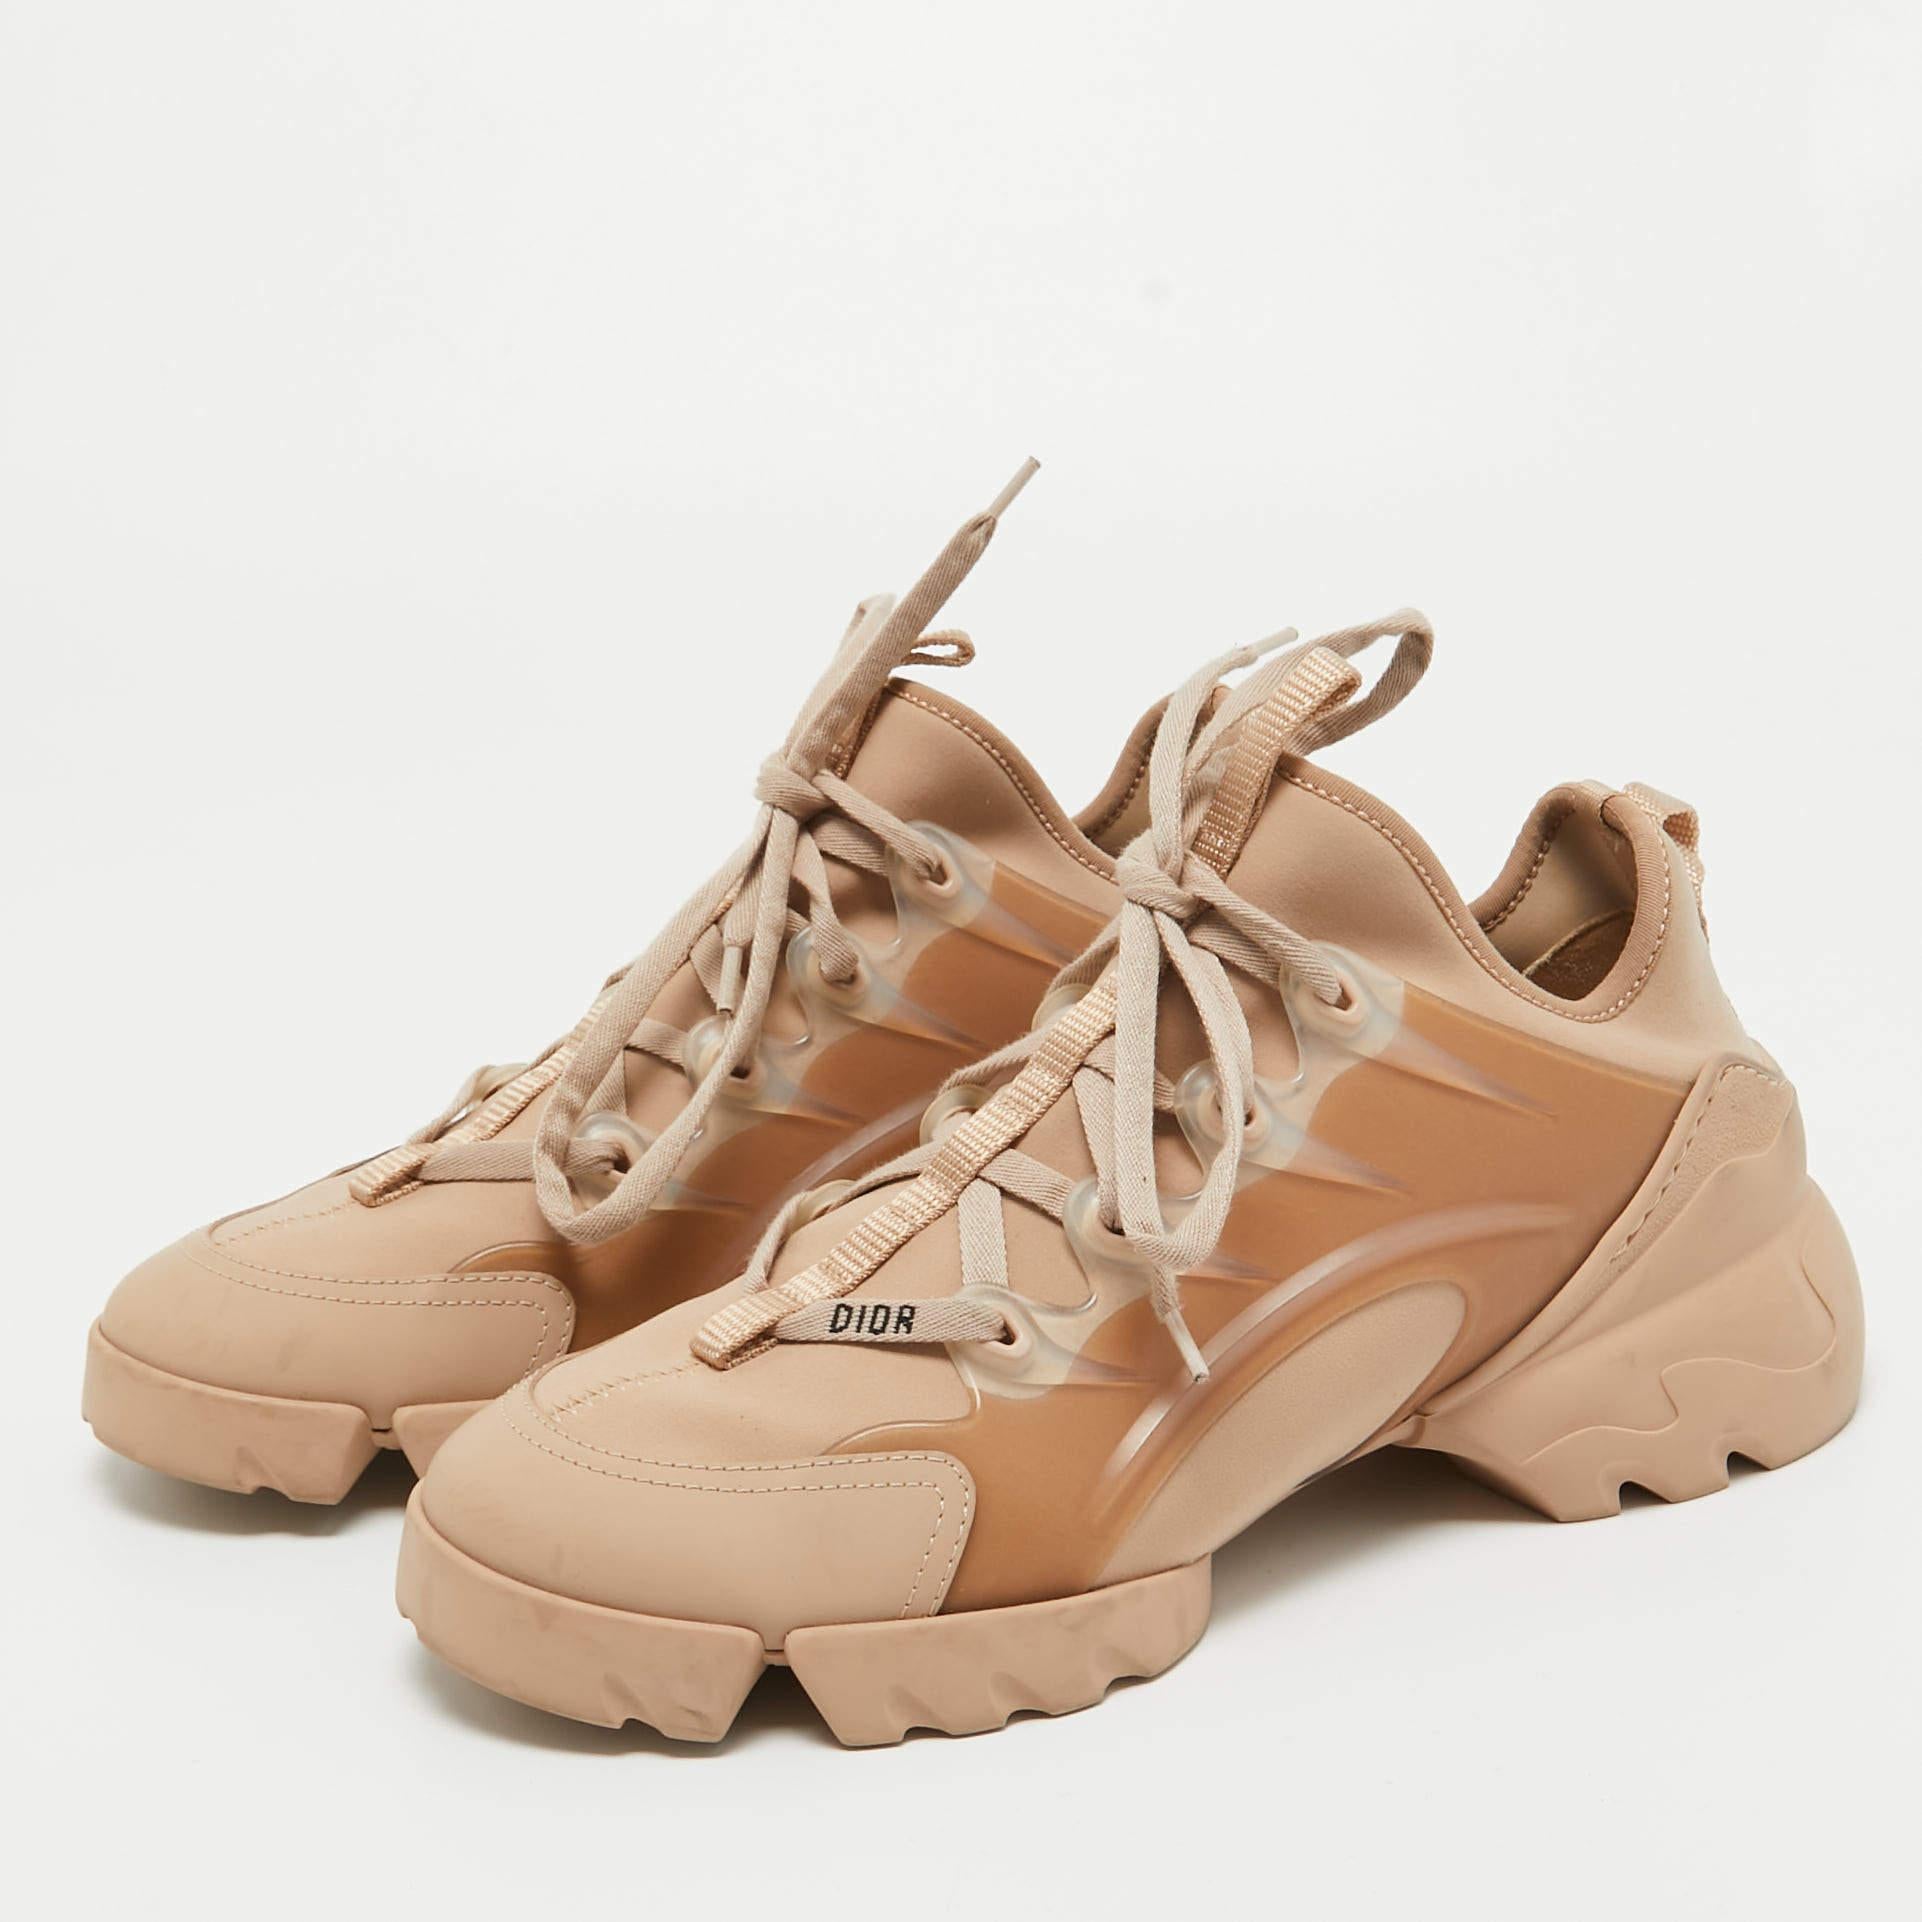 Dior Beige Neoprene and Rubber D-Connect Sneakers Size 39.5 1